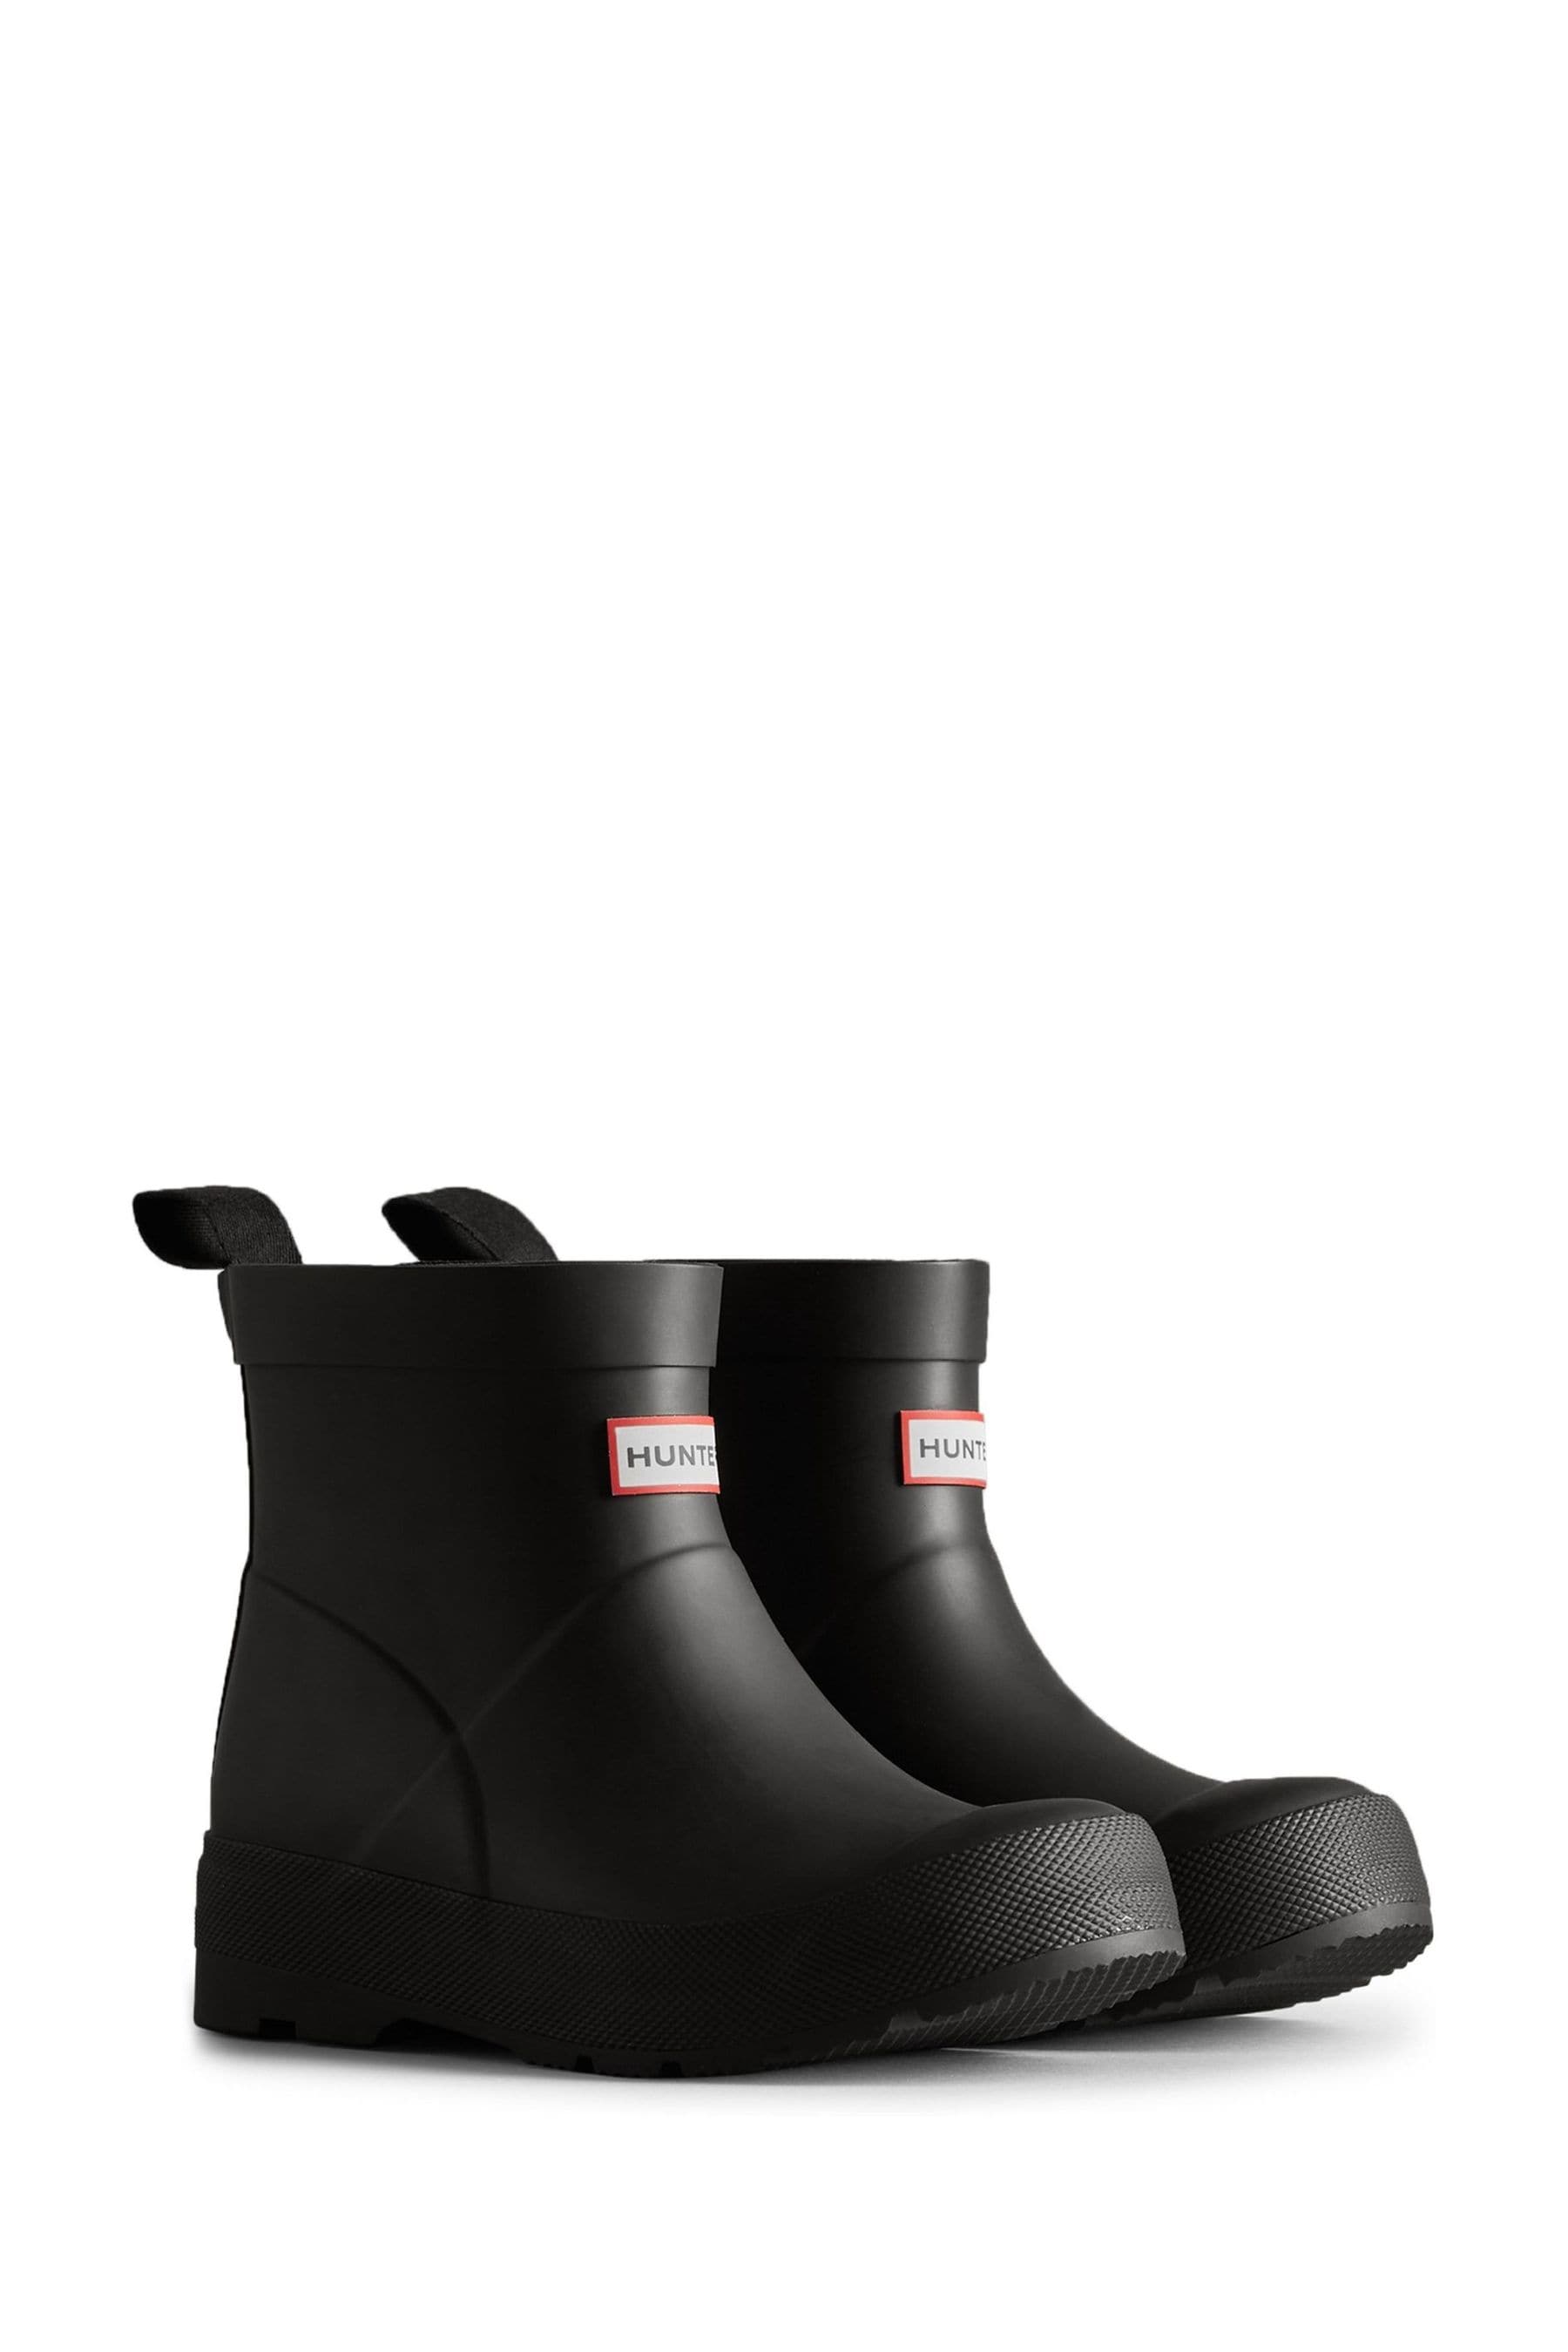 Buy Hunter Kids Black Big Play Boots from the Next UK online shop